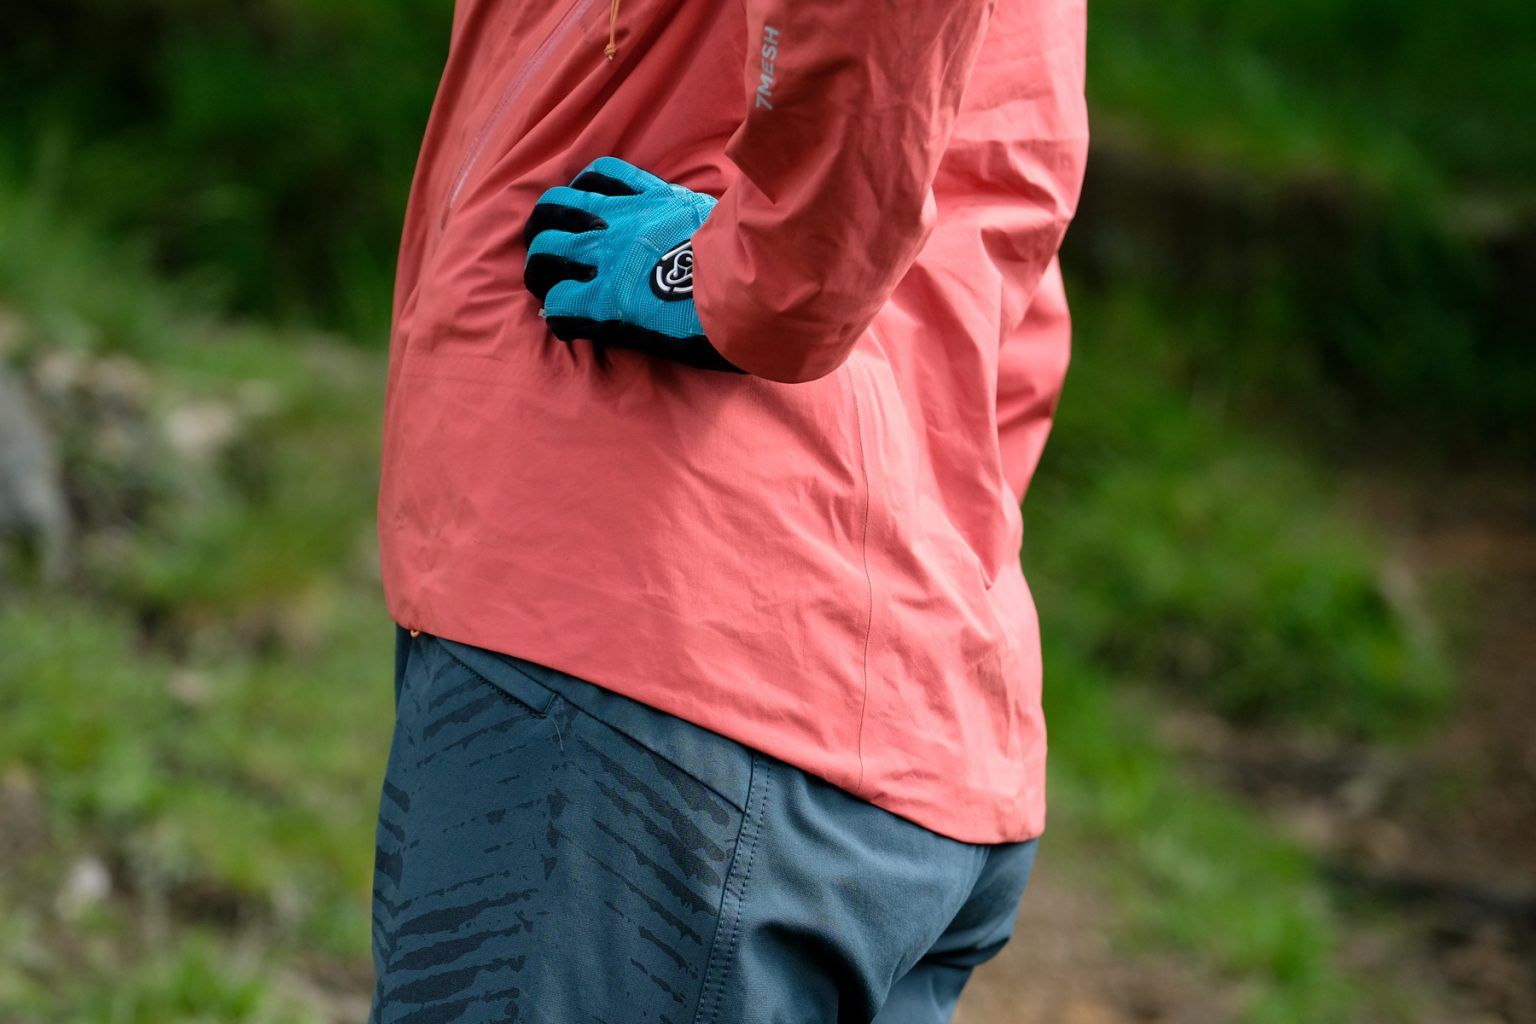 7MESH Copilot Jacket Reviewed | Packable Waterproofing for the Trail